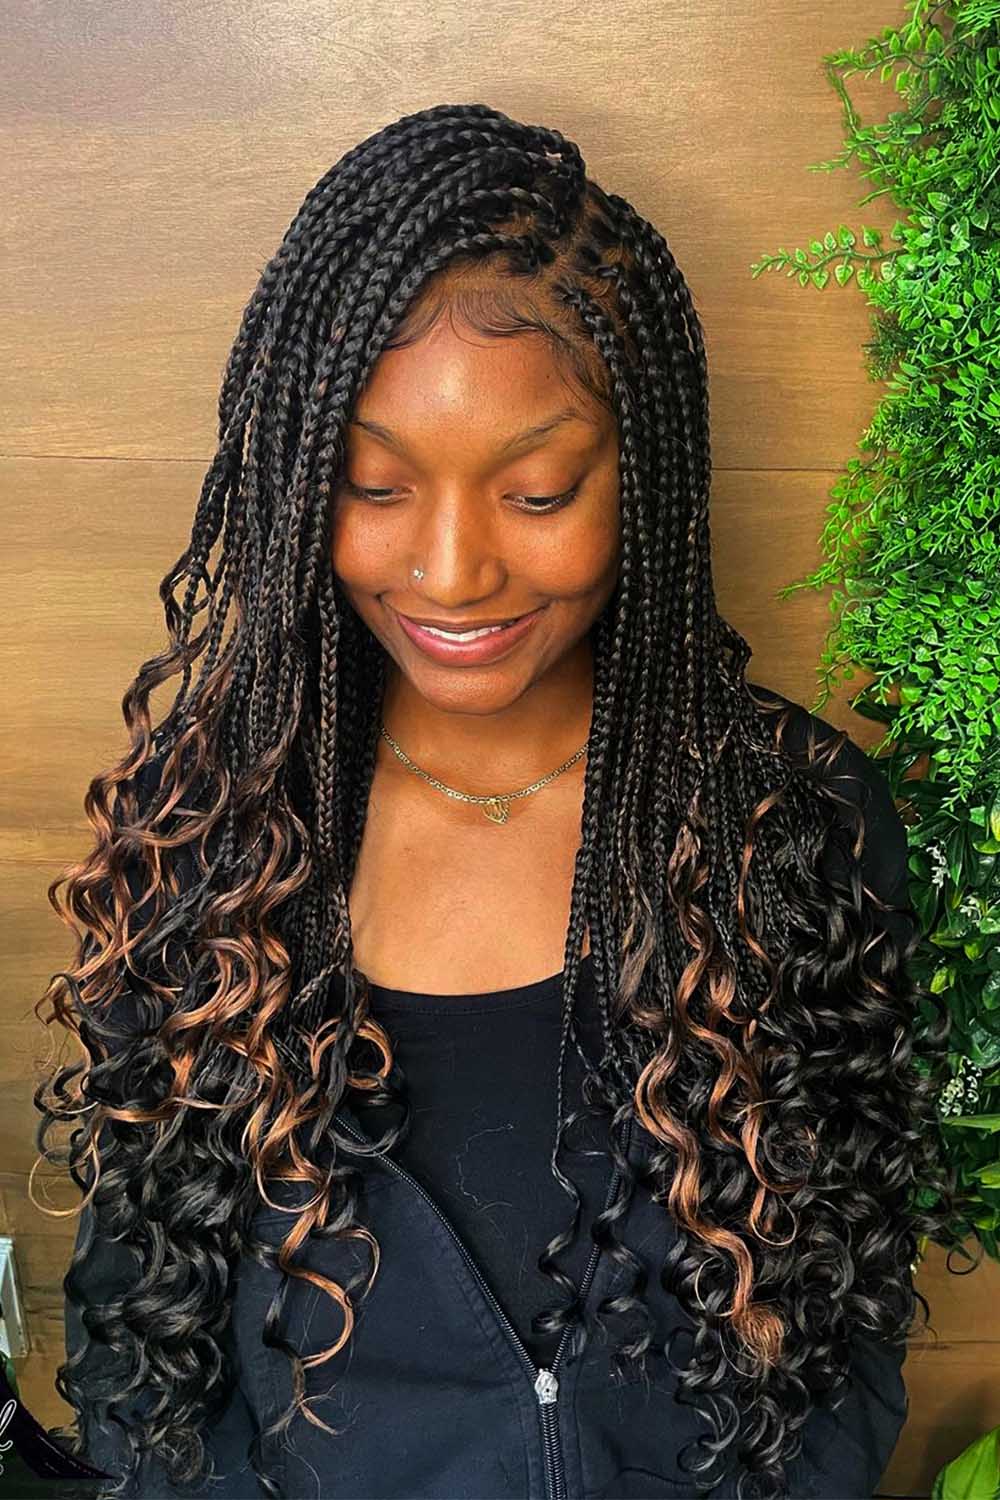 Peekaboo Braids with Brown Curly Ends